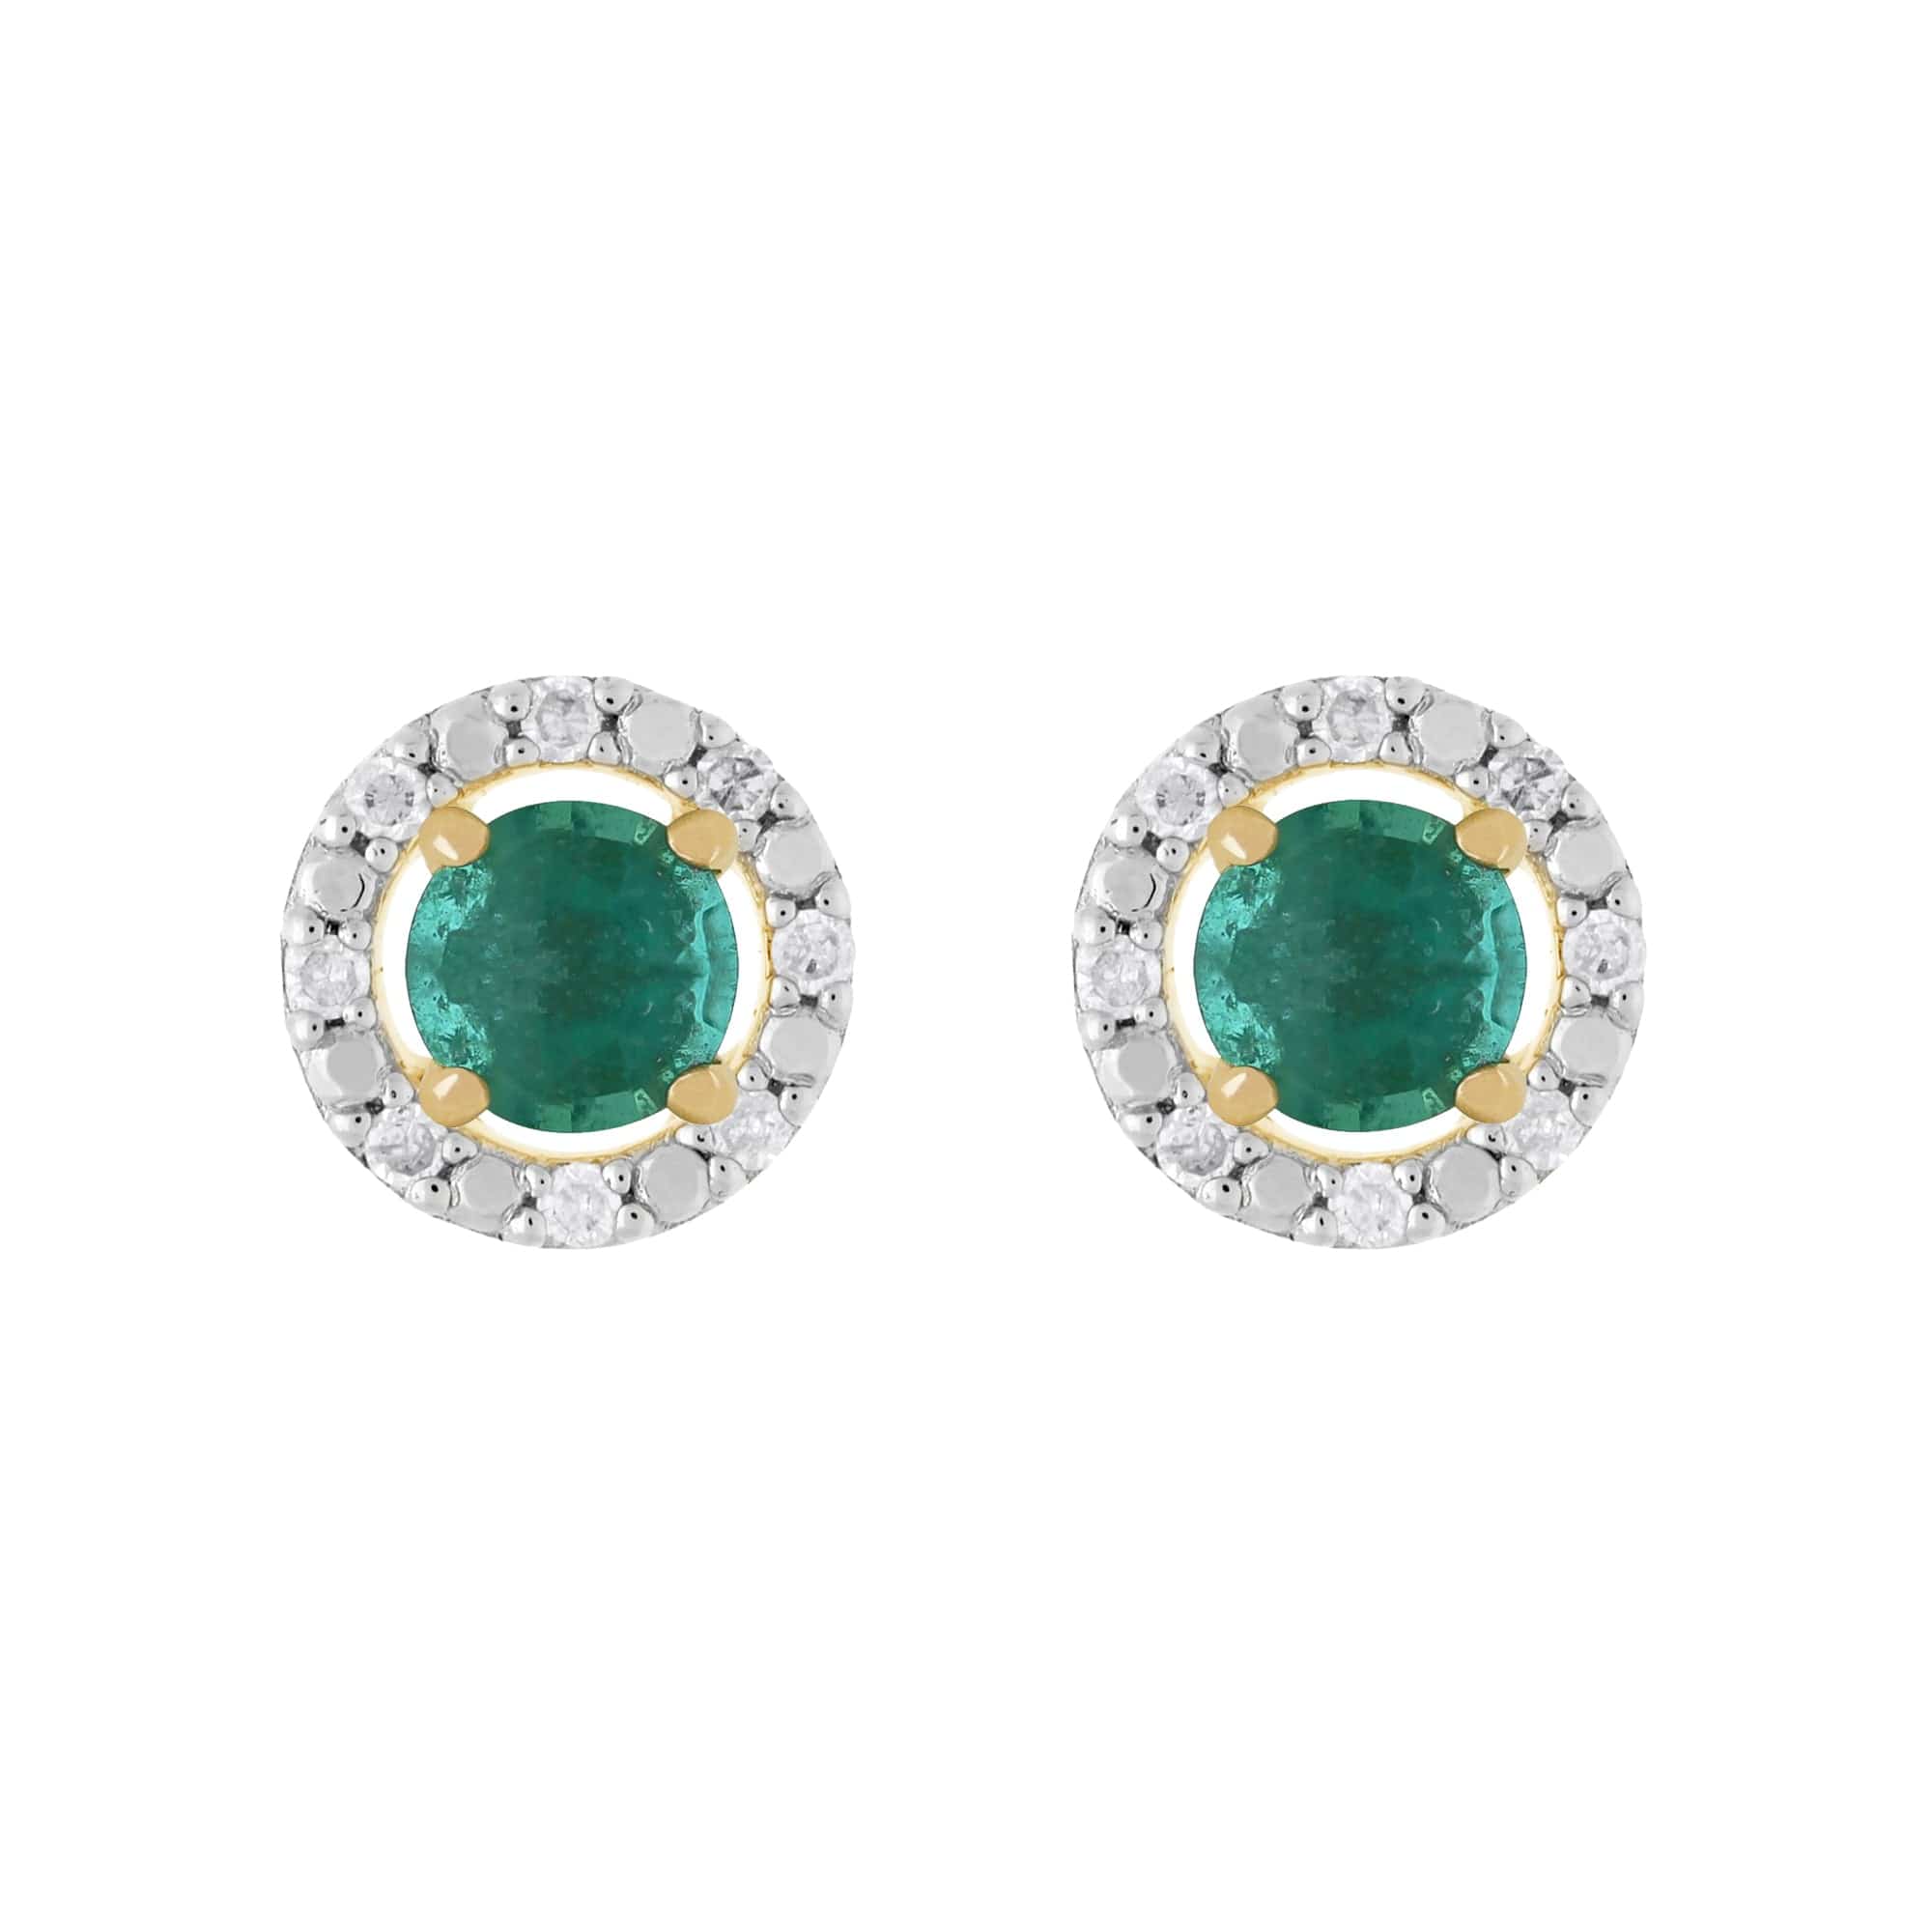 11569-191E0376019 Classic Round Emerald Stud Earrings with Detachable Diamond Round Earrings Jacket Set in 9ct Yellow Gold 1